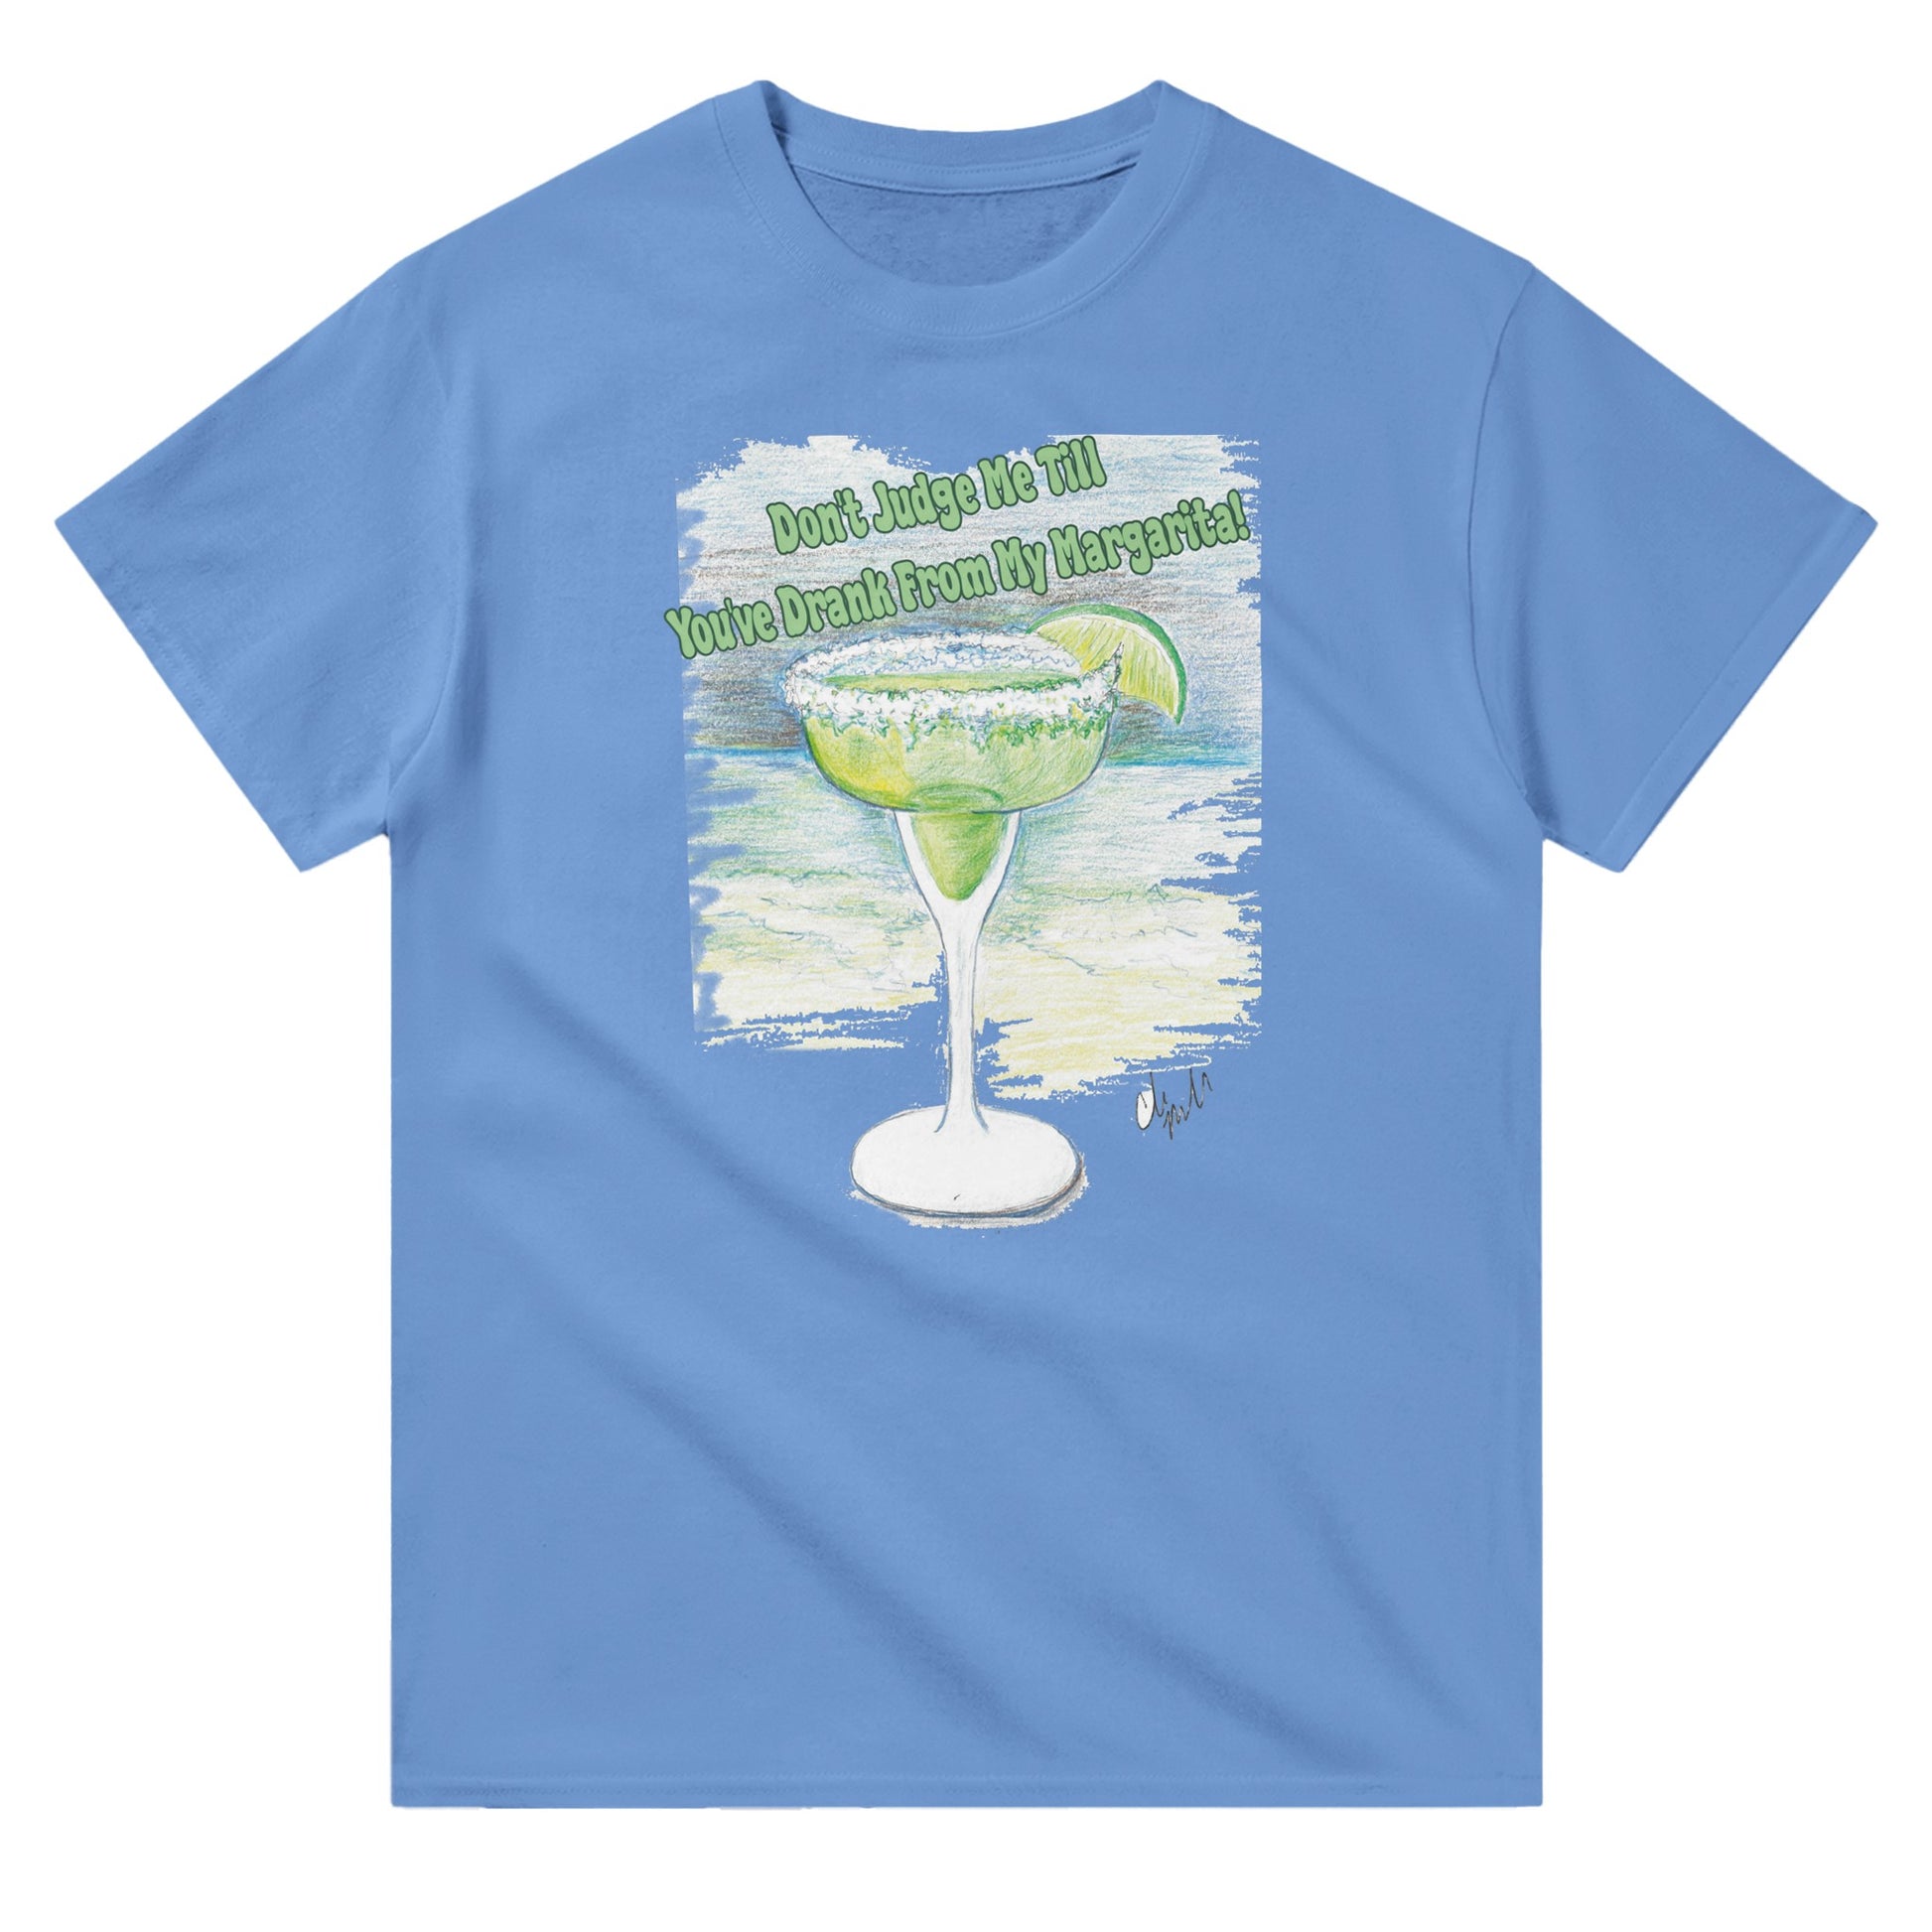 A Carolina blue heavyweight Unisex Crewneck t-shirt with original artwork and motto Don’t Judge Me Till You’ve Drank from my margarita on front of t-shirt.